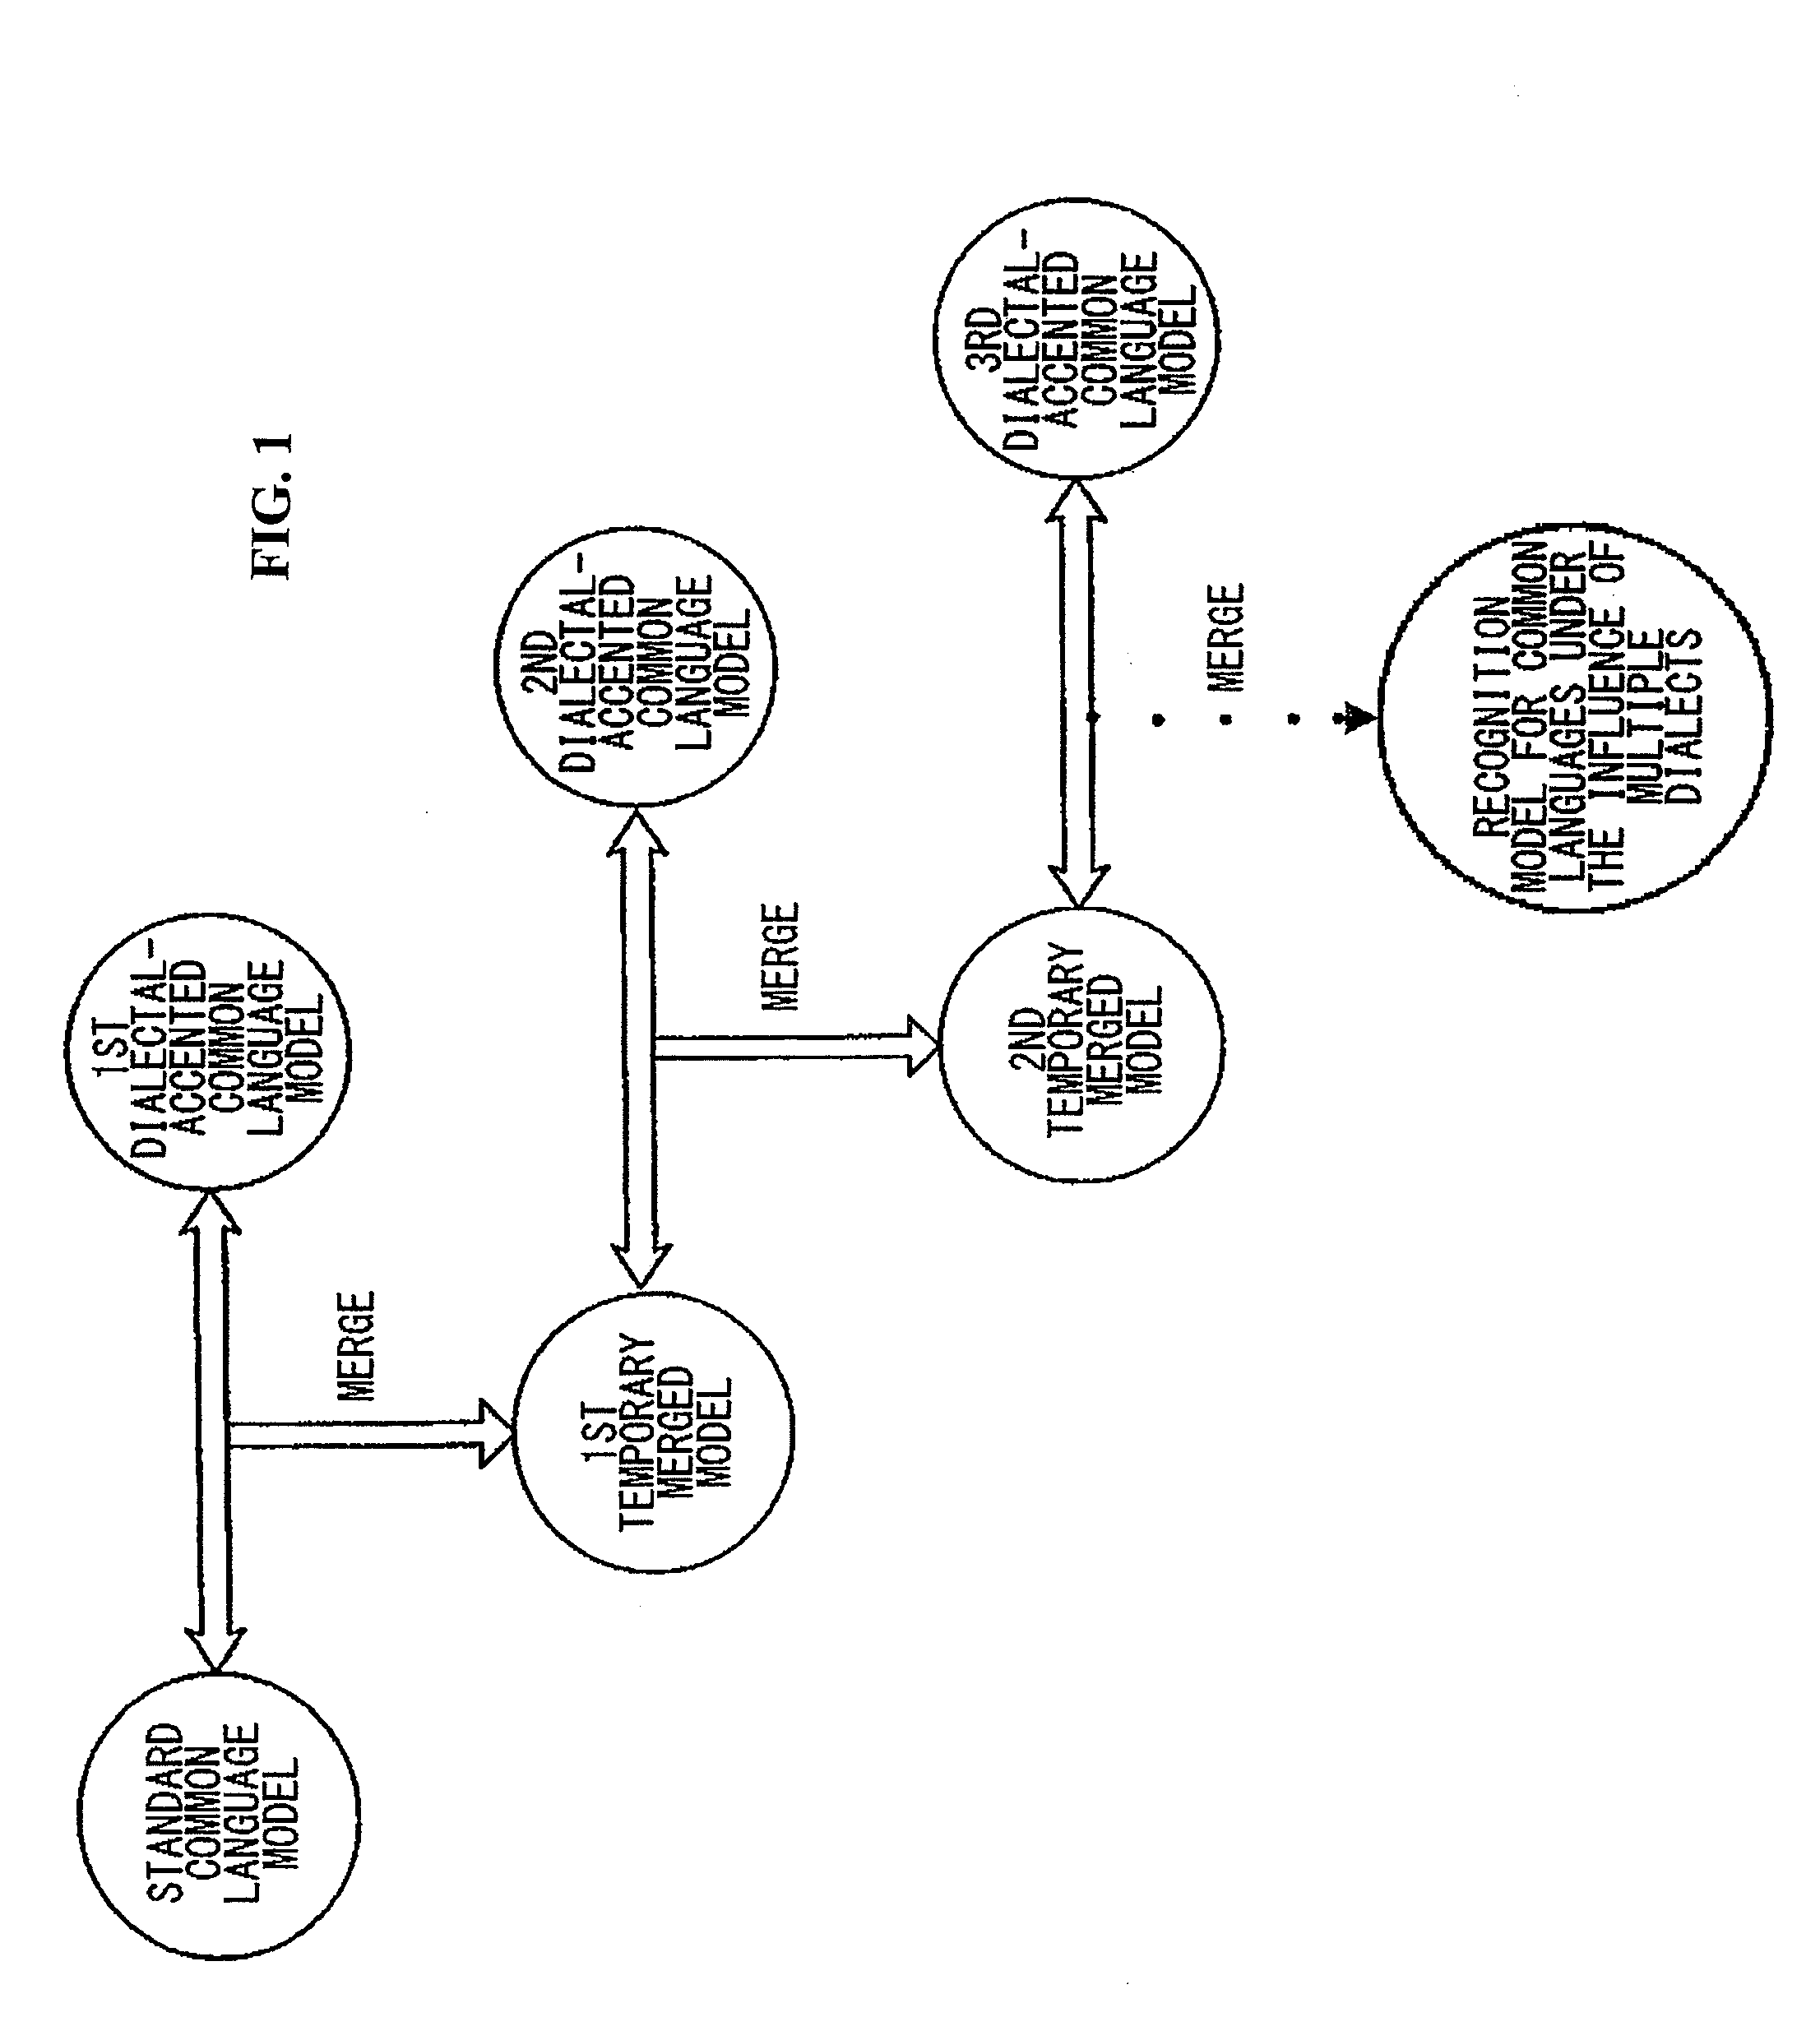 Method and system for modeling a common-language speech recognition, by a computer, under the influence of a plurality of dialects